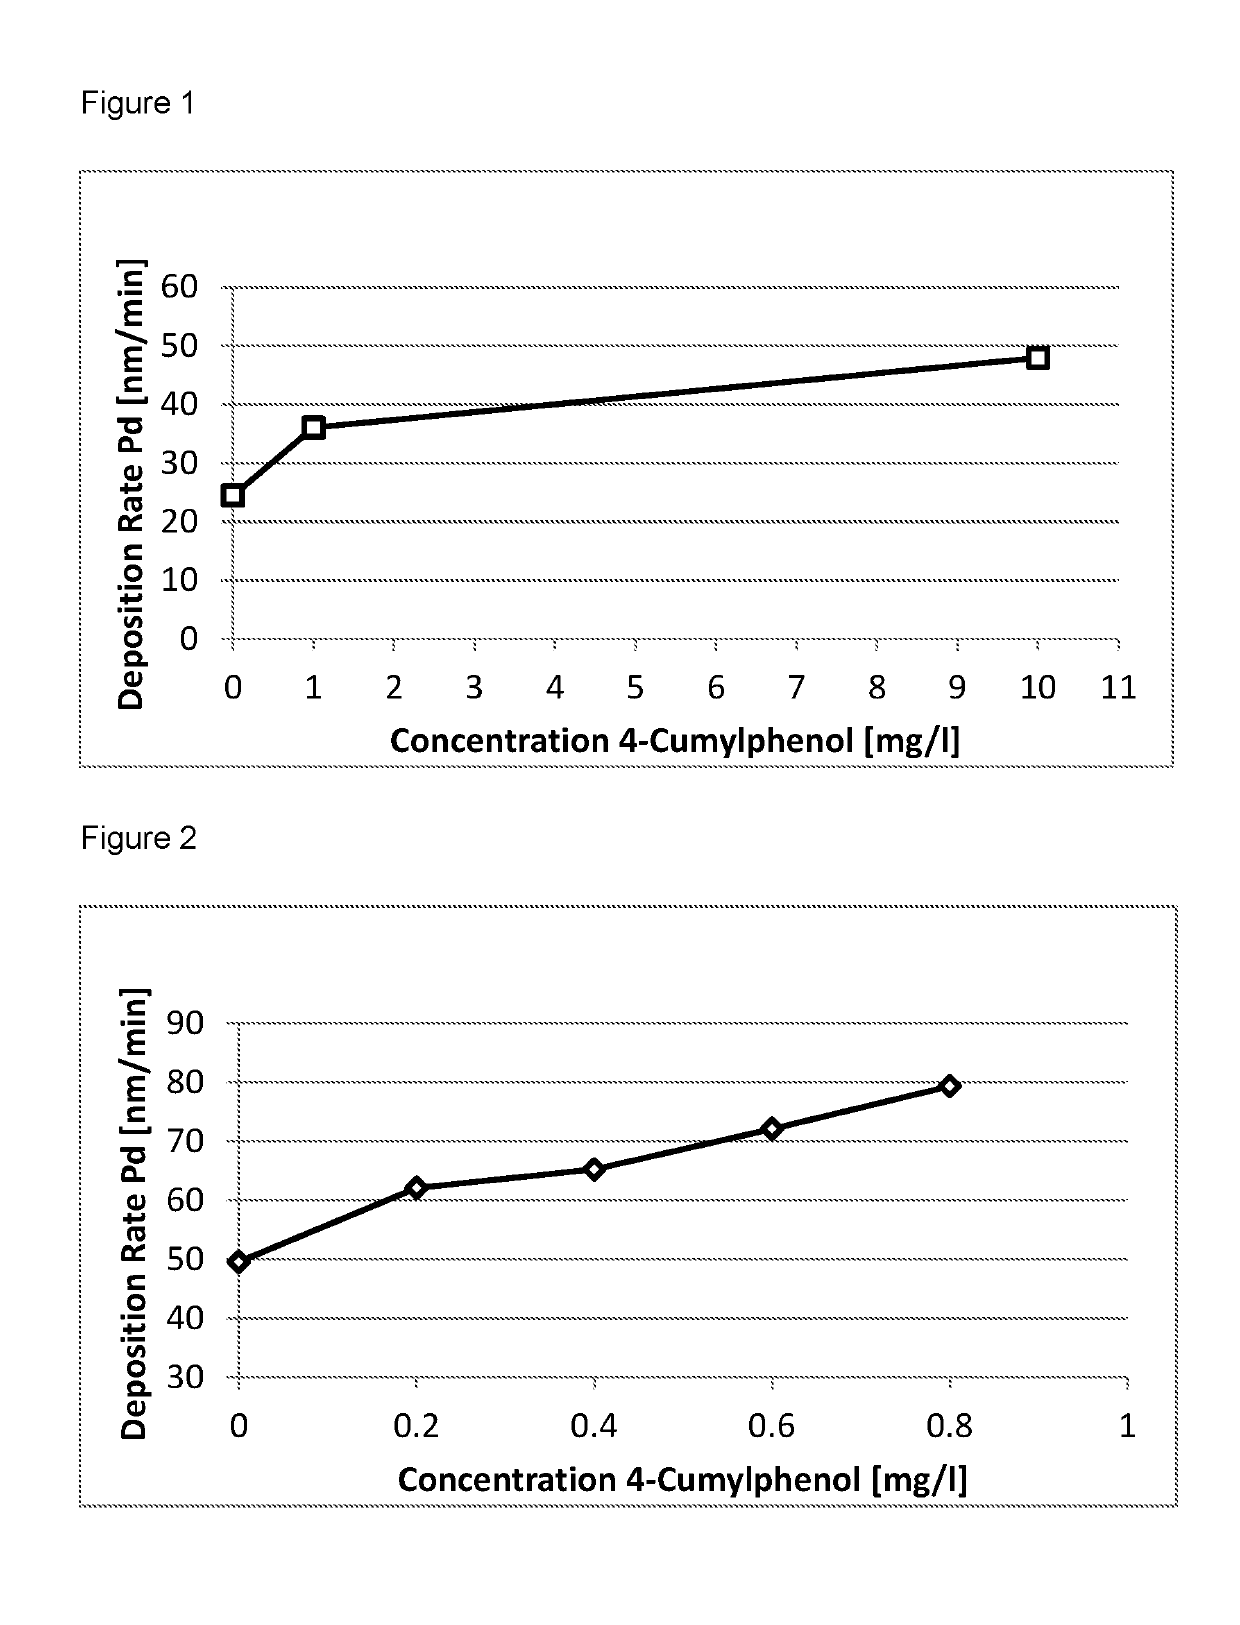 Plating bath composition and method for electroless plating of palladium